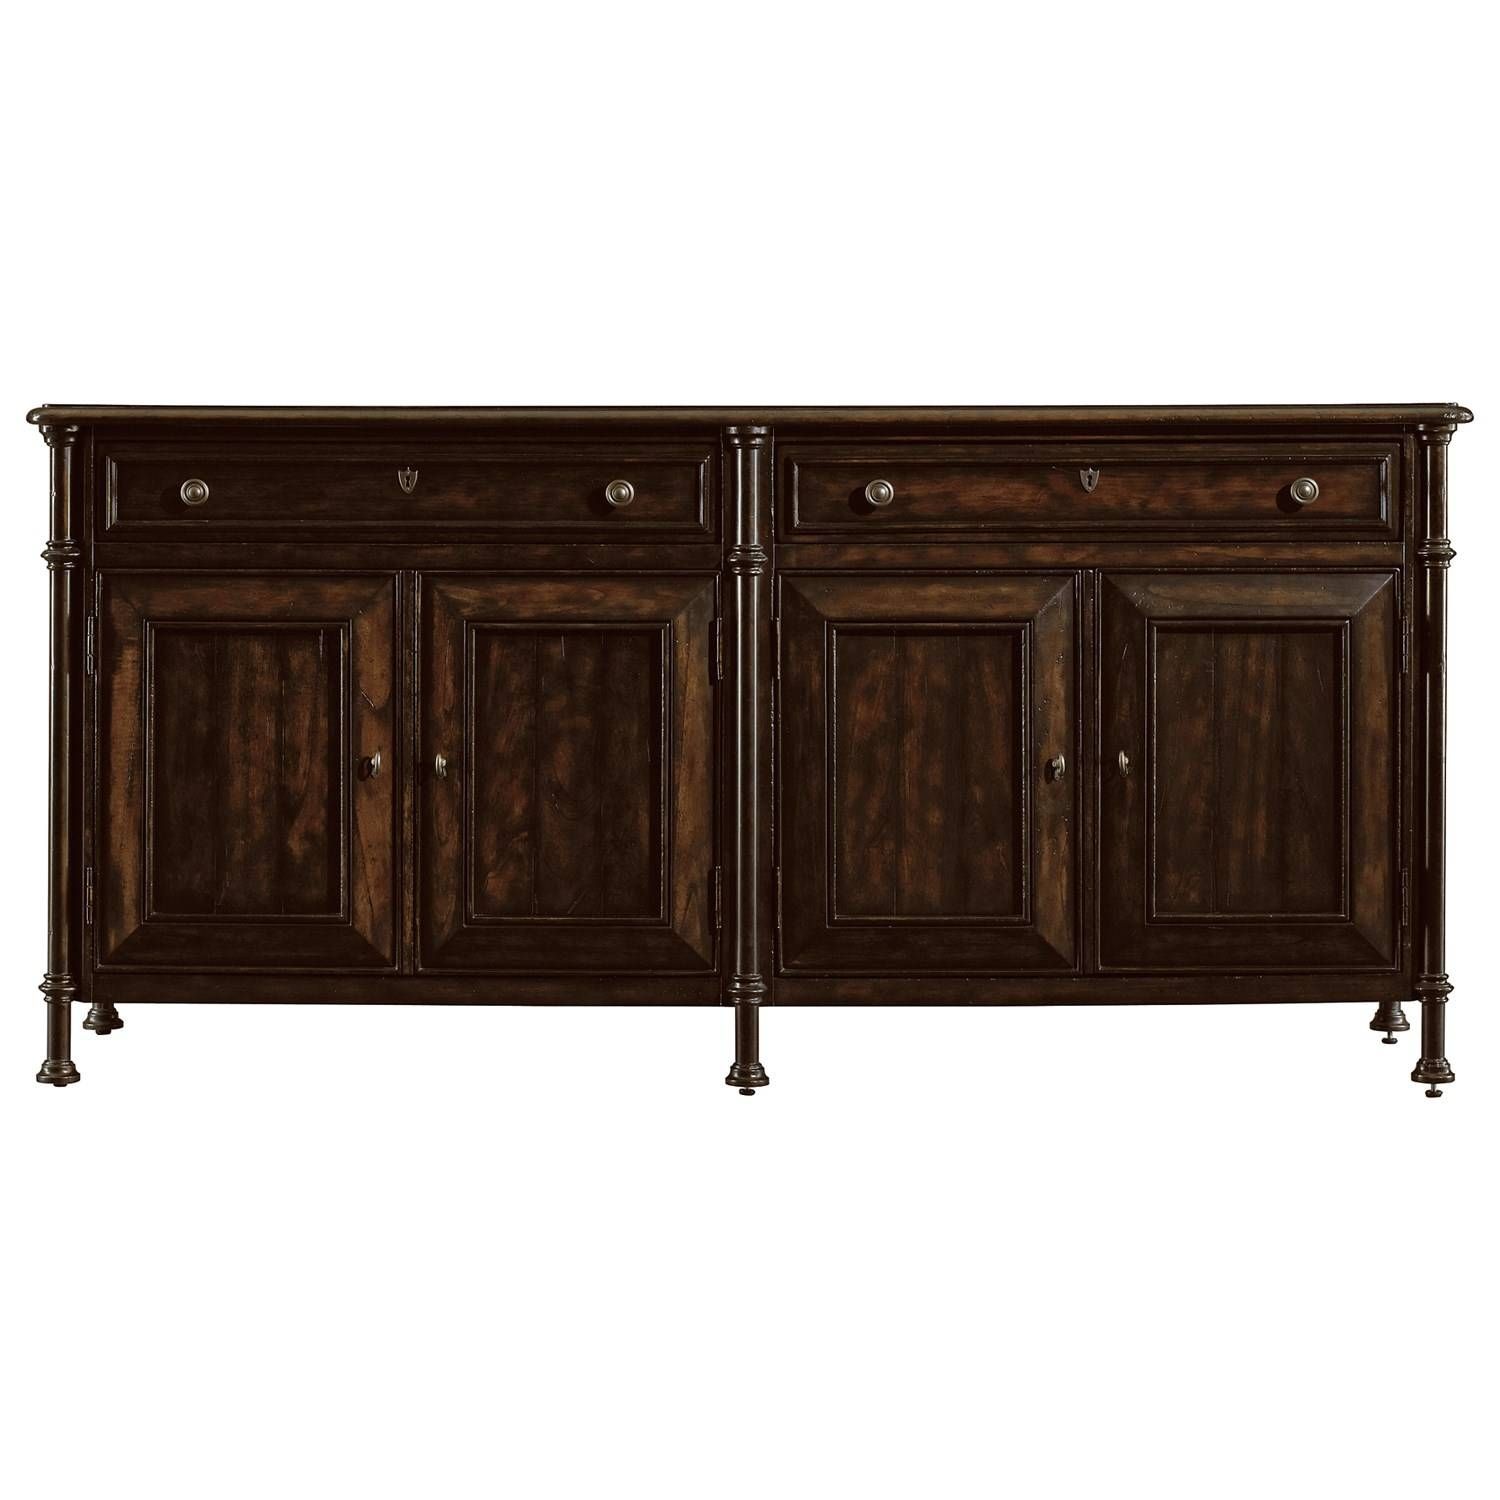 Traditional Buffet Tables & Sideboards | Homeclick In Traditional Sideboards (View 8 of 30)